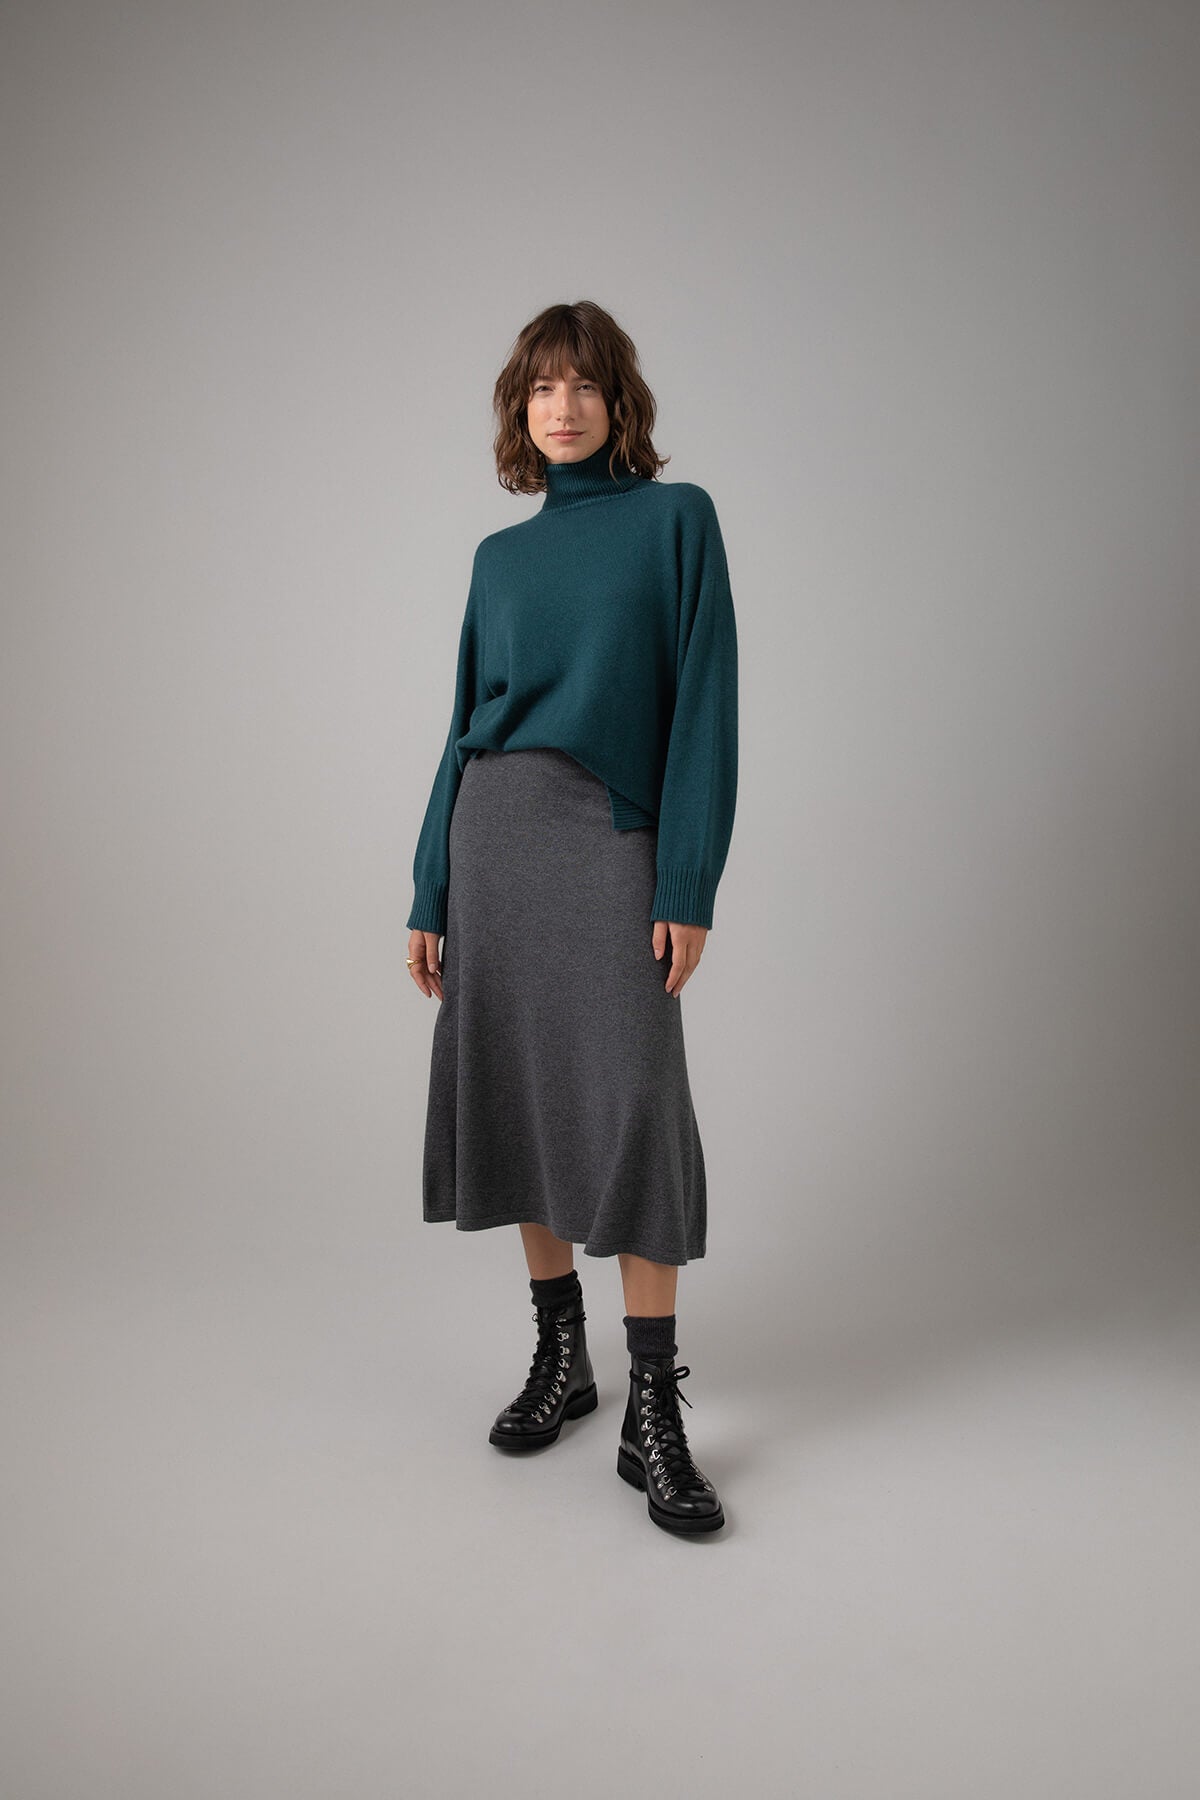 Johnstons of Elgin Women's A-Line Cashmere Skirt in Mid Grey worn with a Mallard Roll Neck Sweater on a grey background KAP05097HA4181